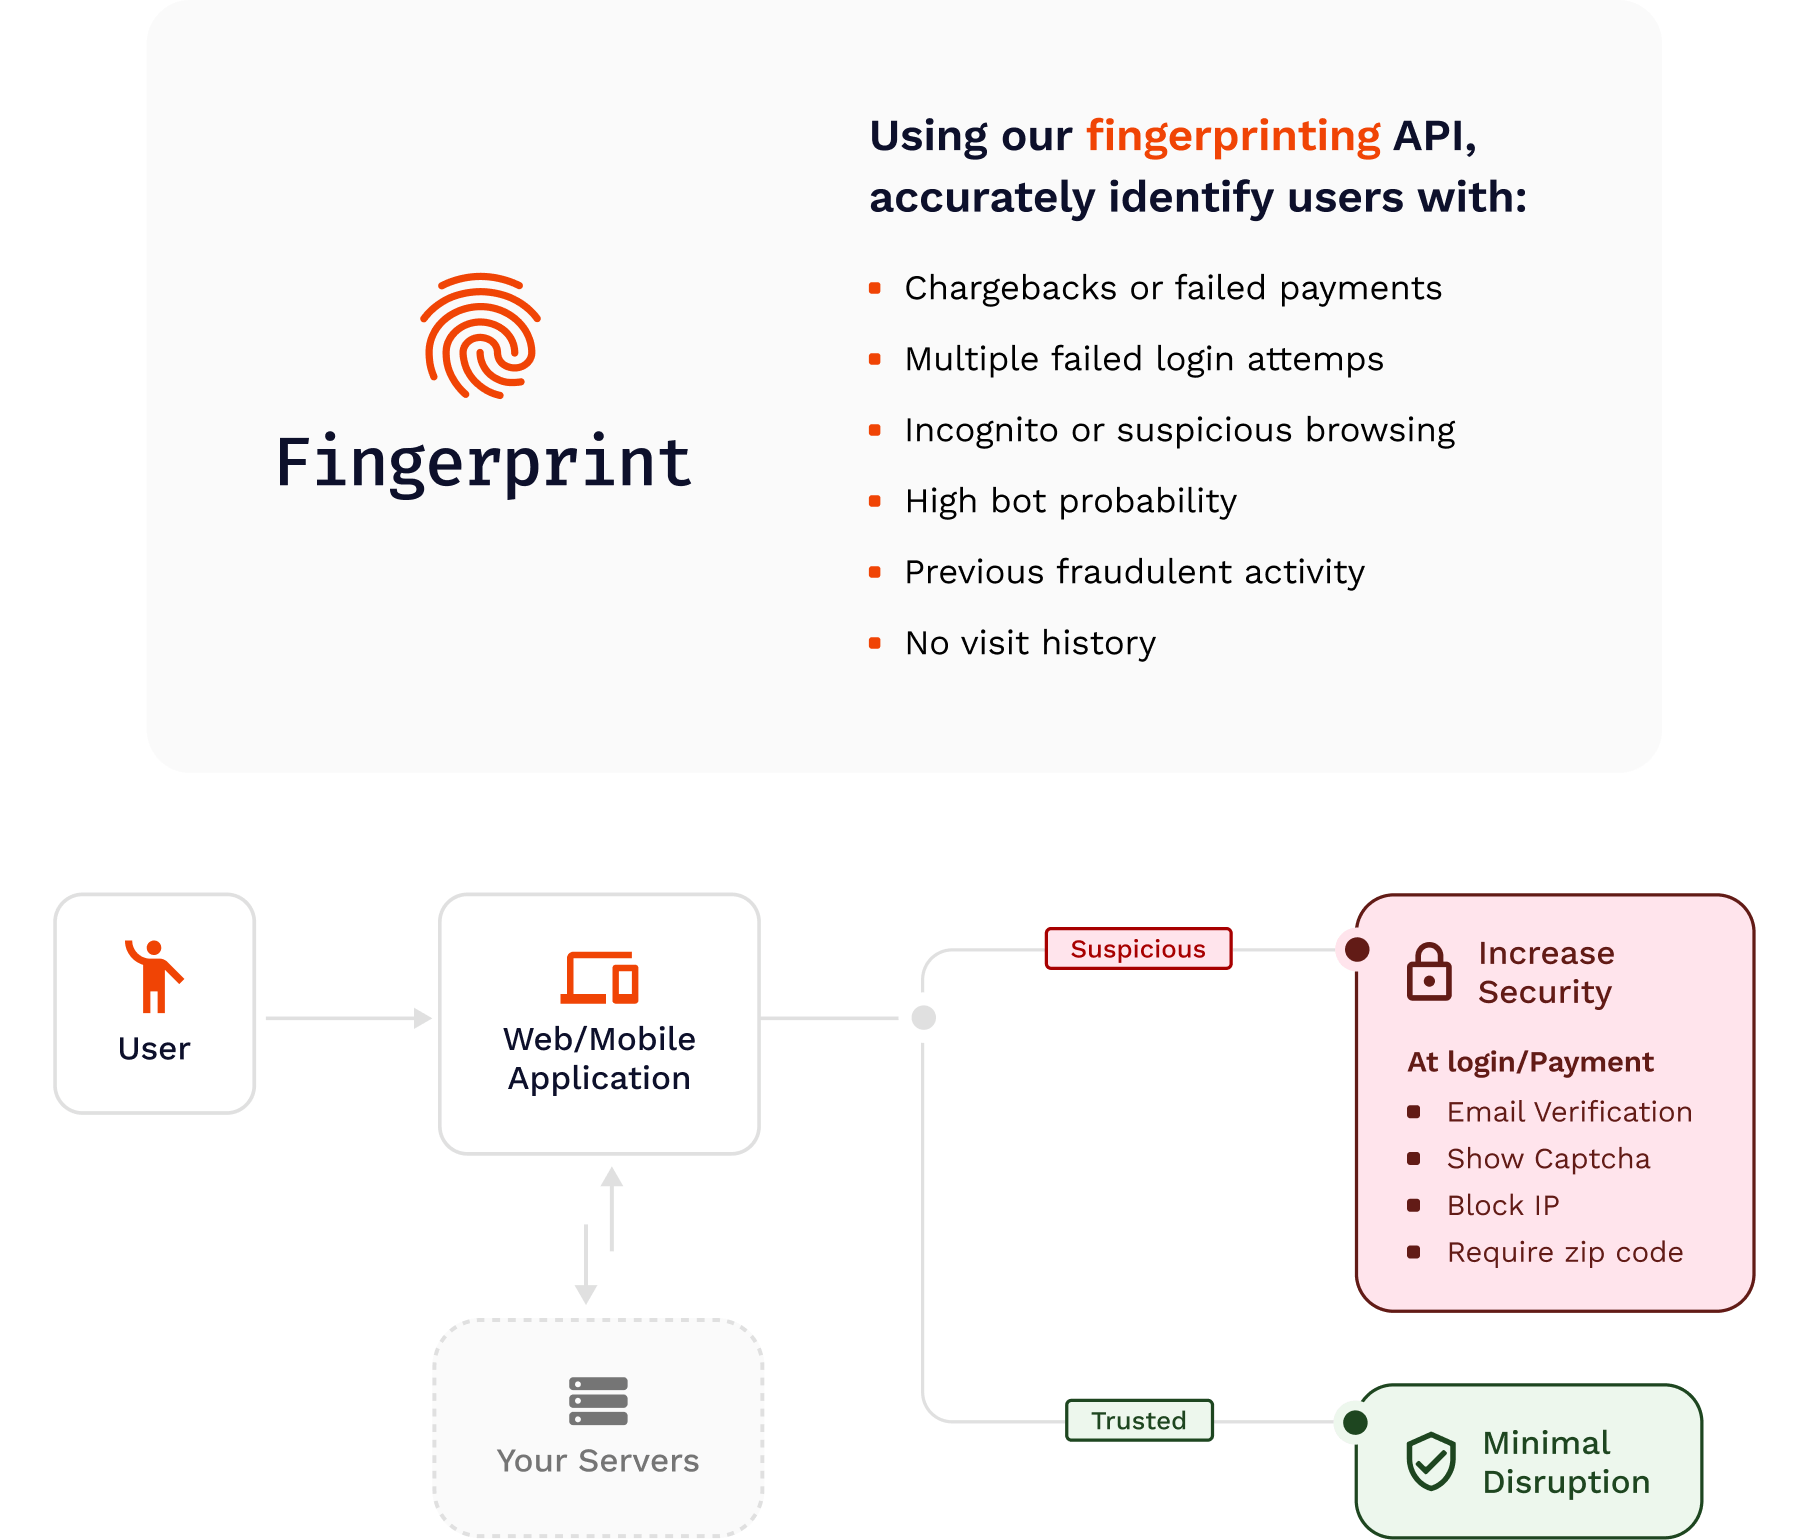 How Fingerprint Protects gaming fraud